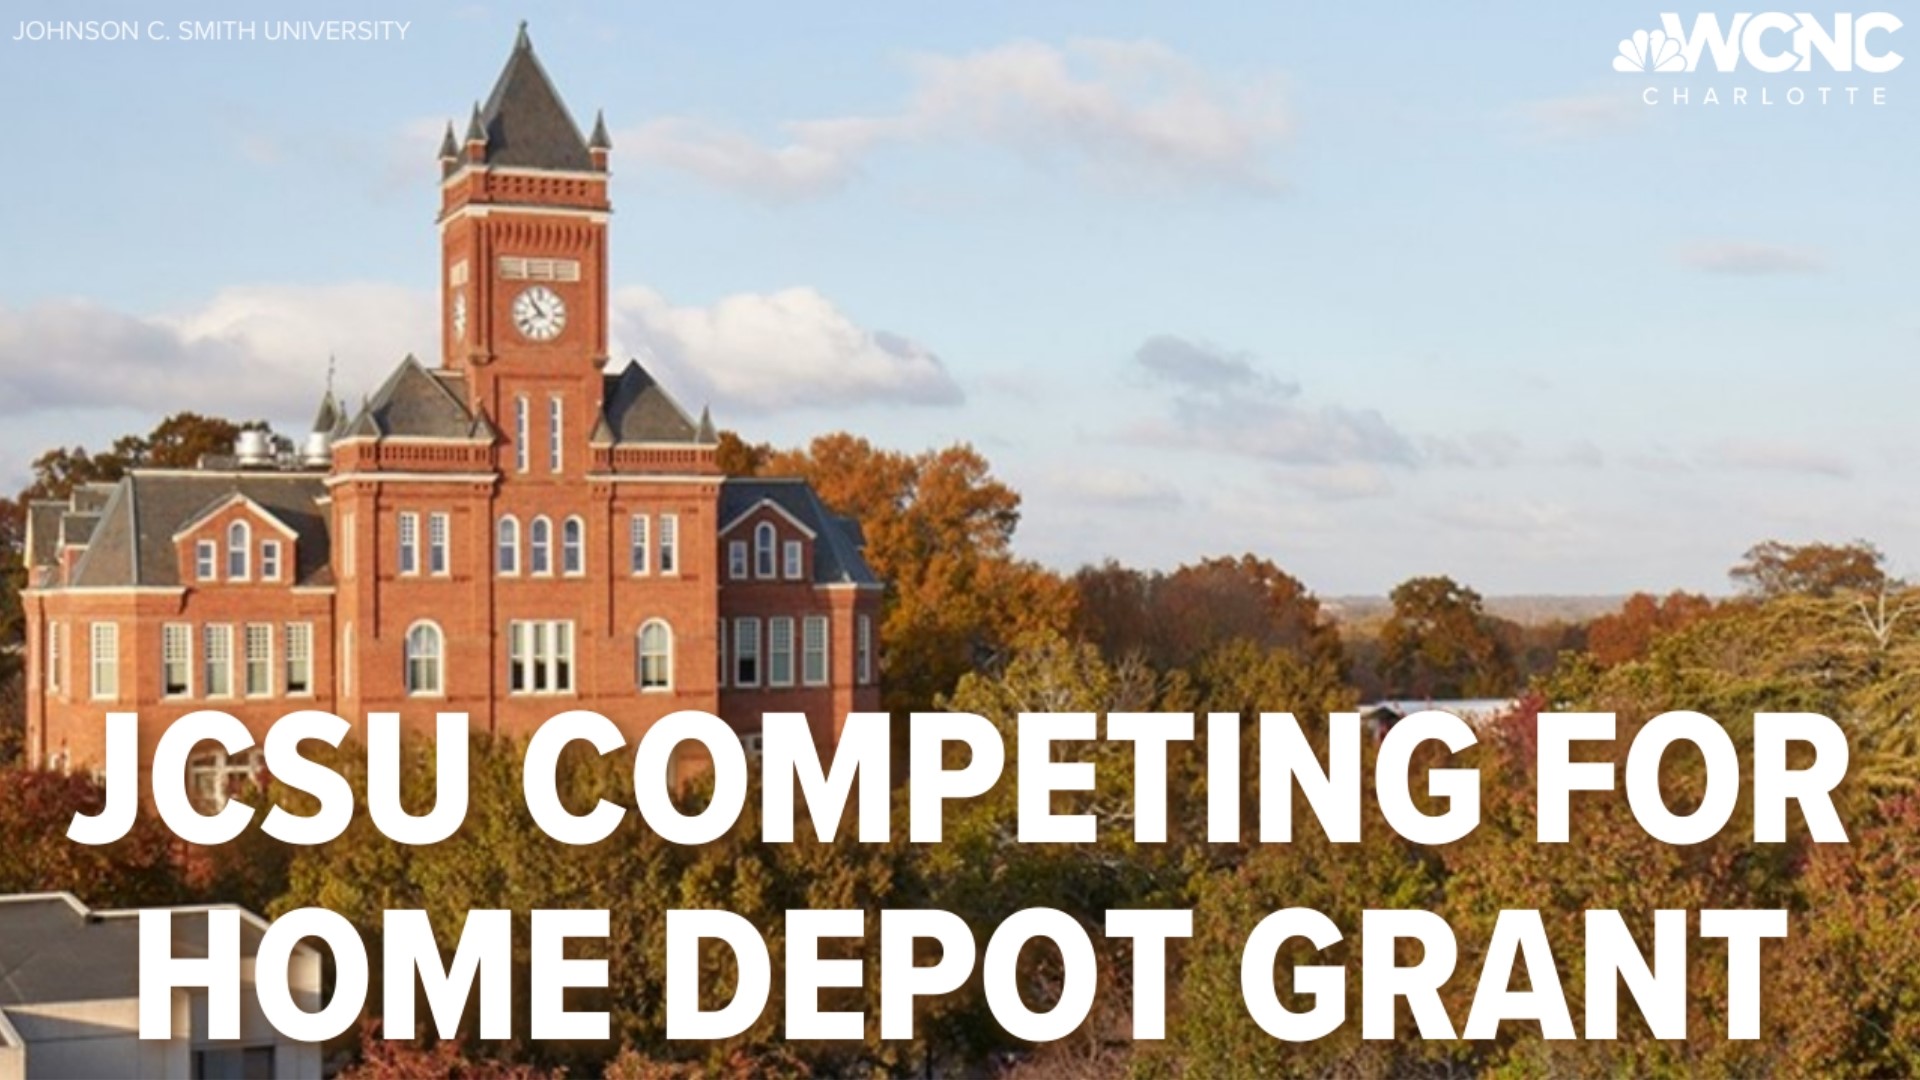 Last year, Johnson C. Smith University won $30,000 from Home Depot for campus improvements. This time, students are hoping to win the grand prize of $150,000.